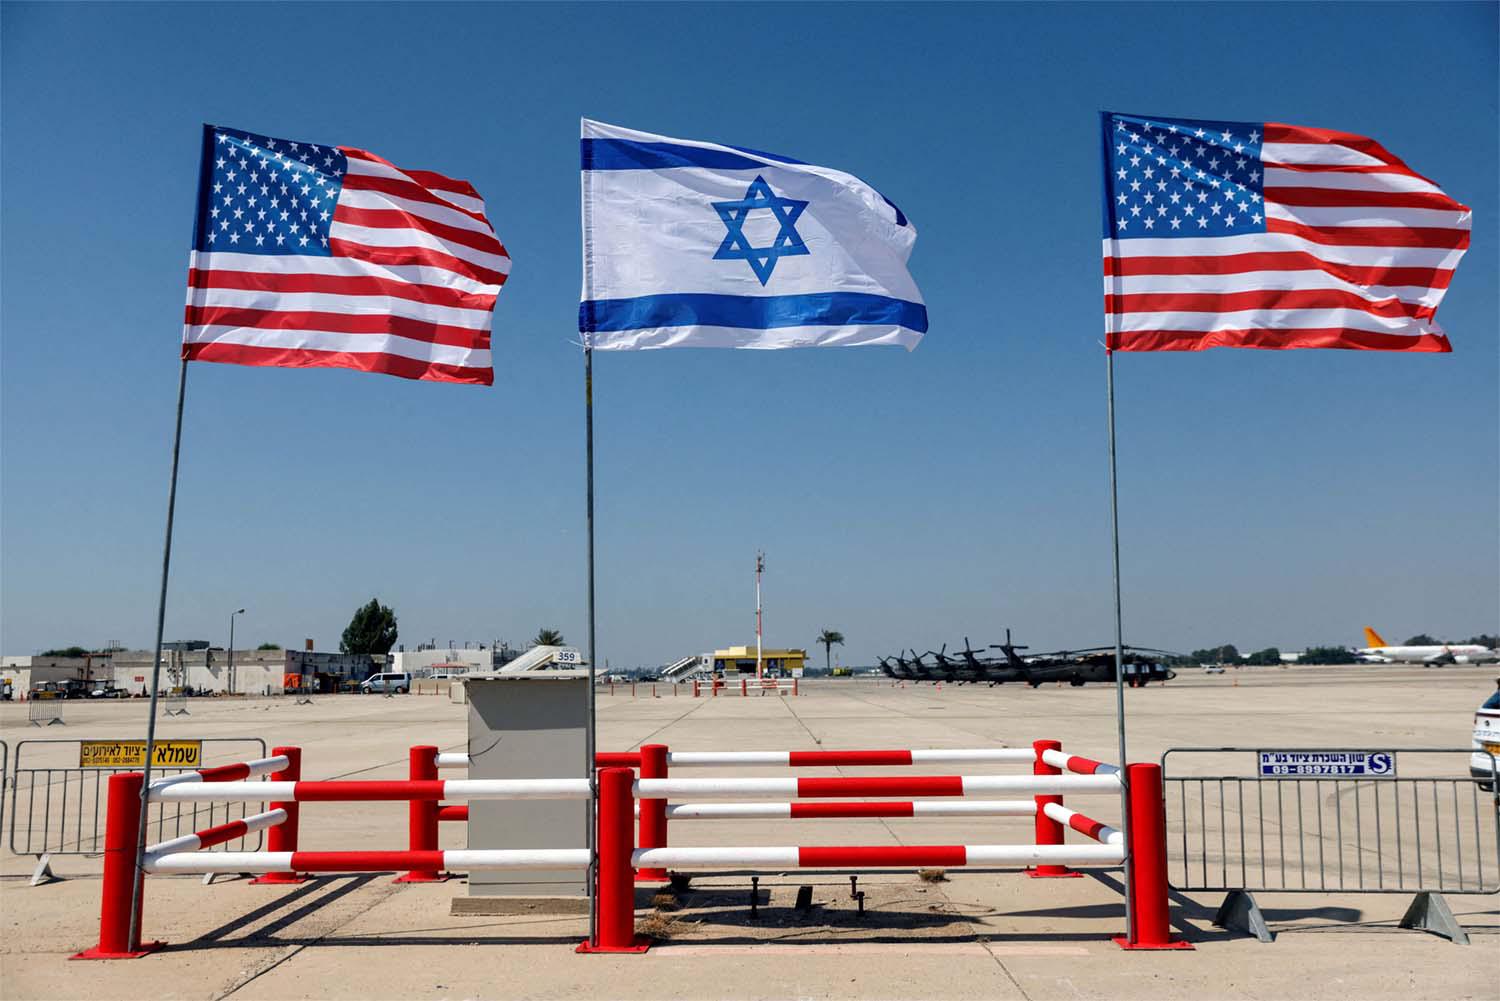 The deadline for Israel to show compliance with the US conditions is September 30